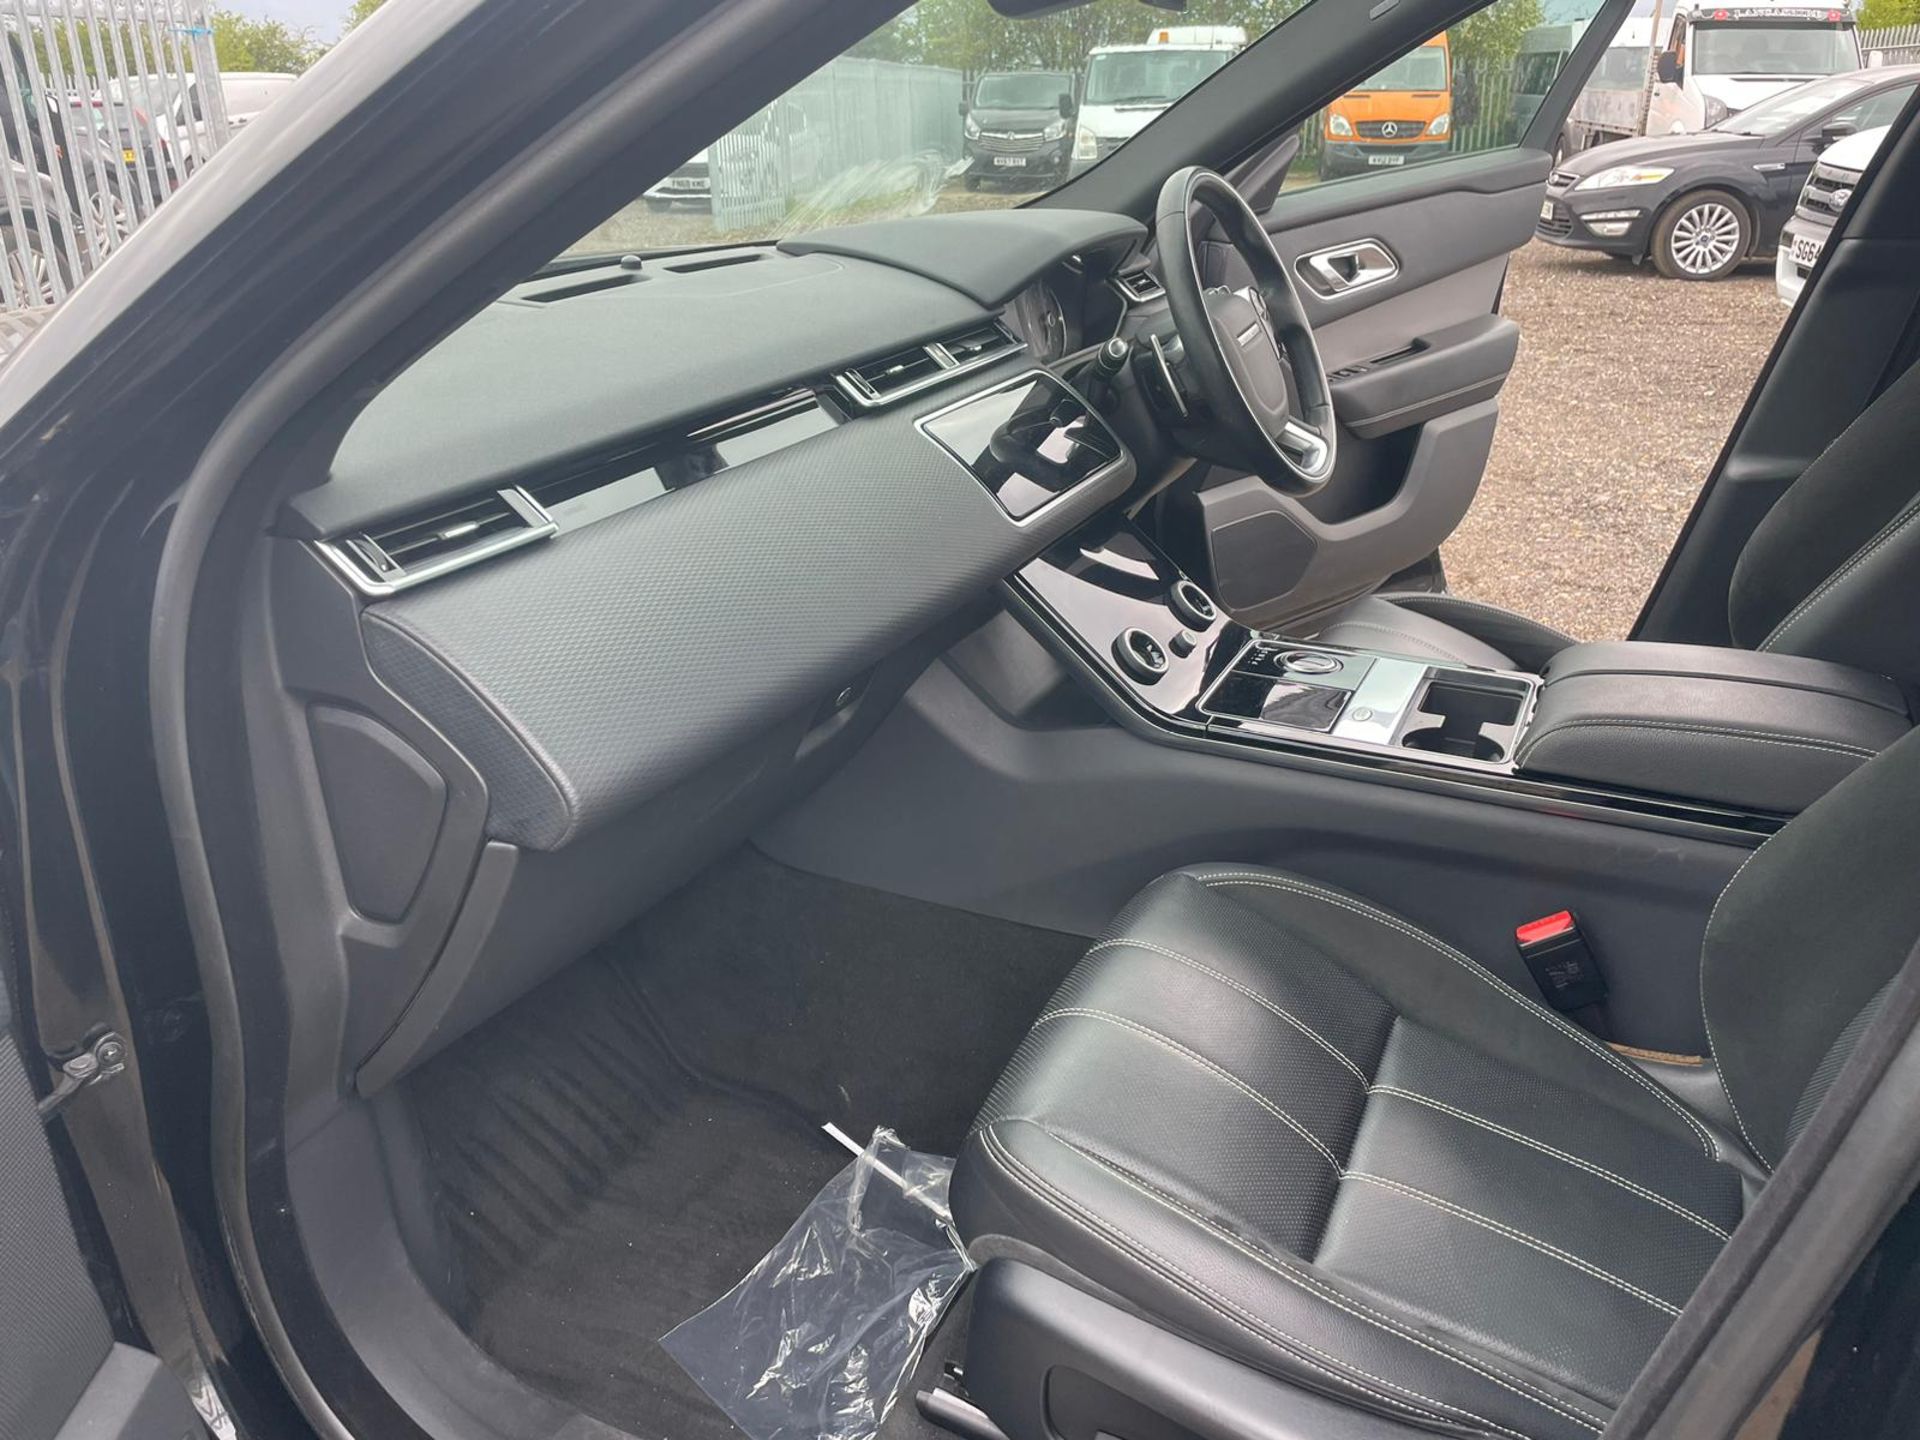 Land Rover Range Rover Velar 2.0 D240 R-Dynamic S 2018 '18 Reg' 4WD - Panoramic Roof- ULEZ Compliant - Image 22 of 33